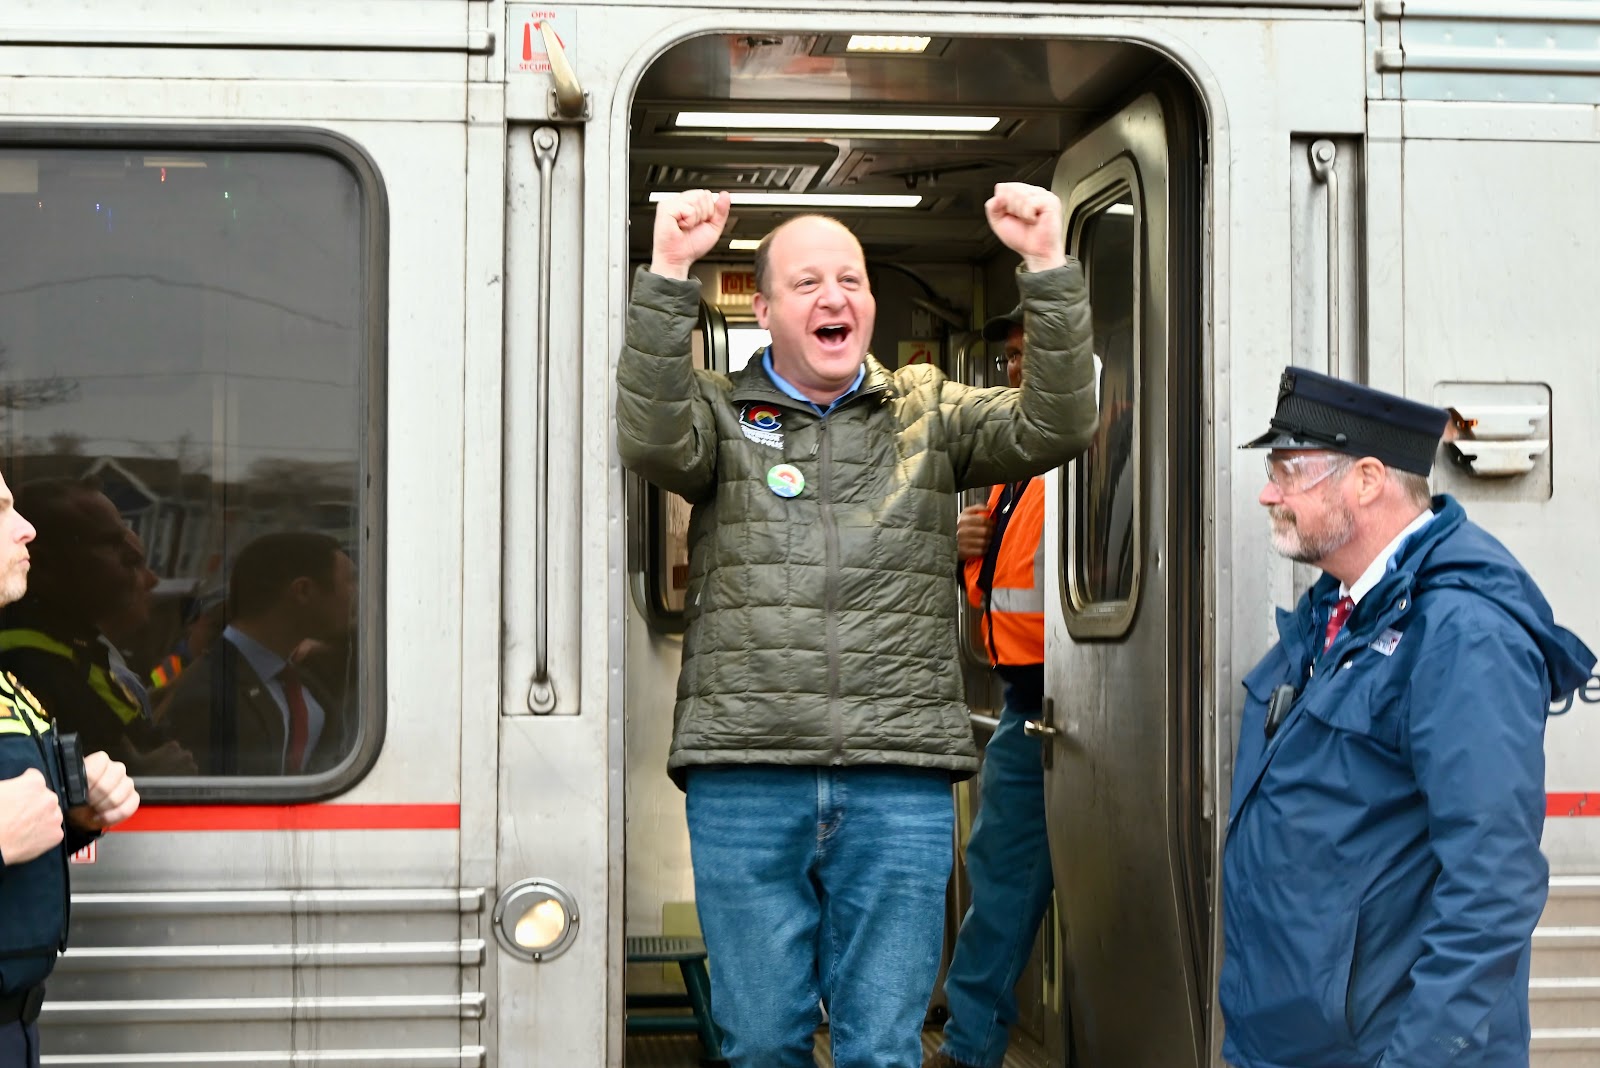 Governor Polis celebrates as he disembarks the train in Longmont.